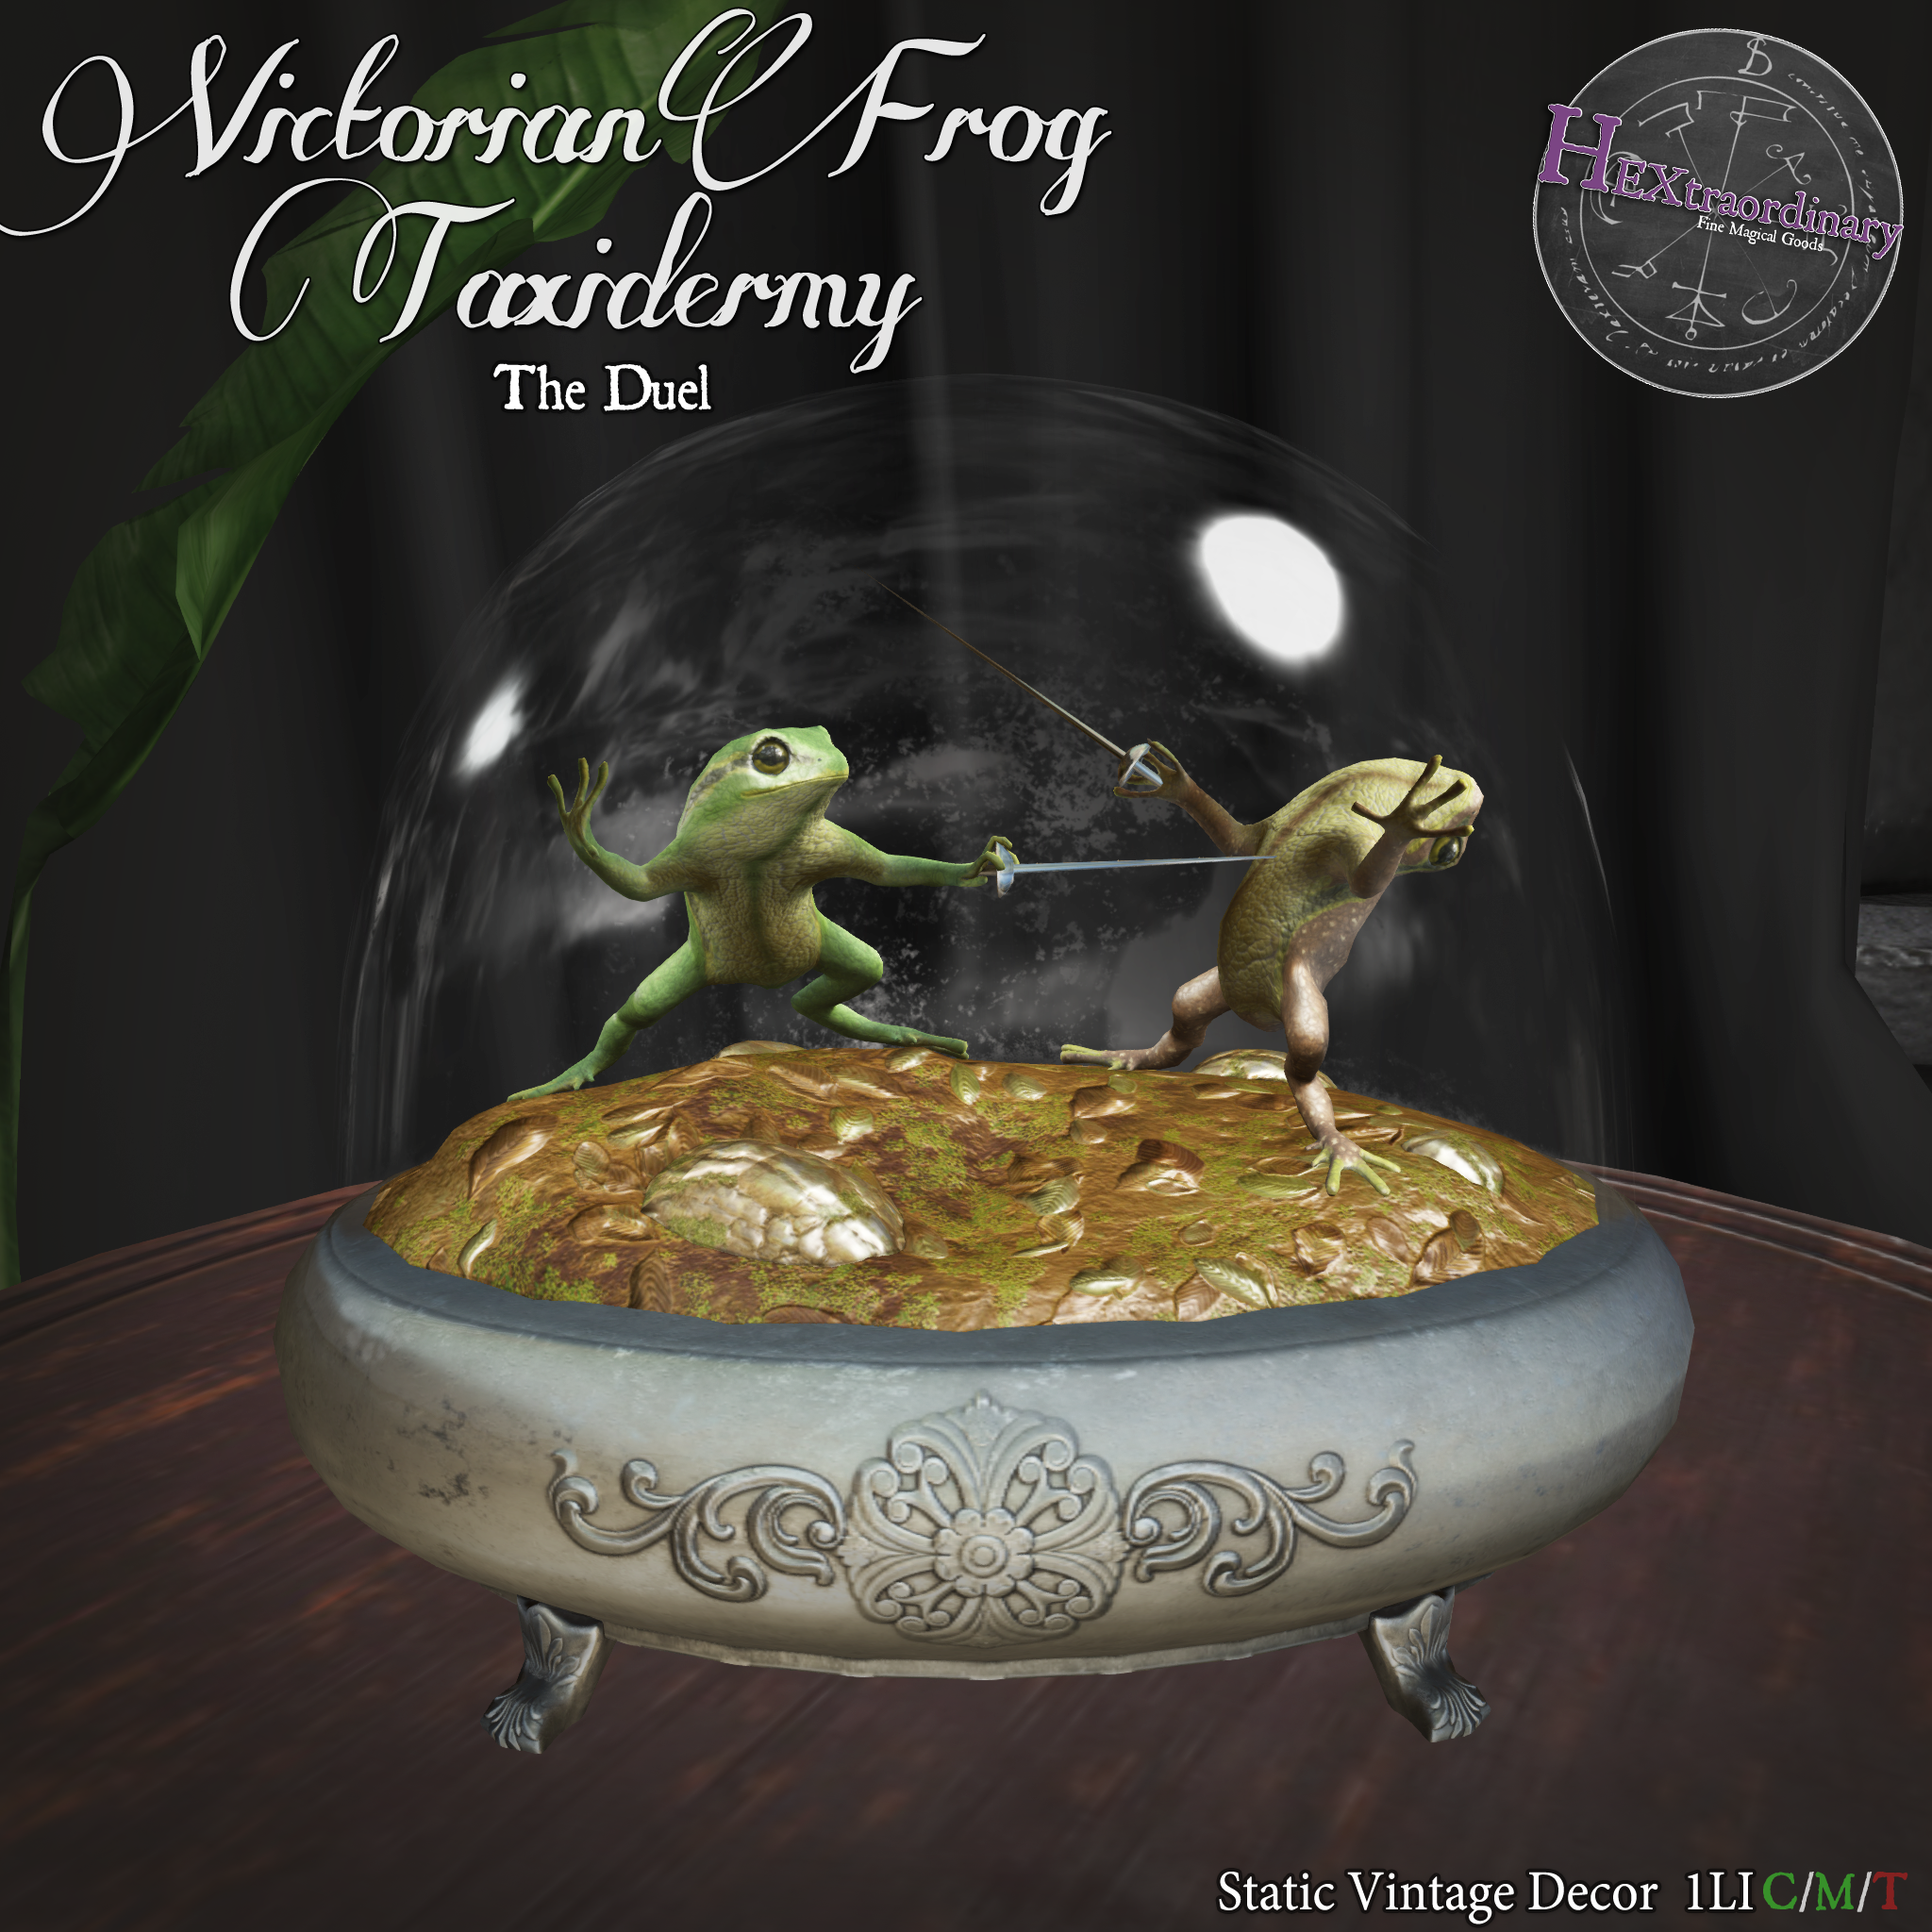 HEXtraordinary – Victorian Frog Taxidermy: The Duel